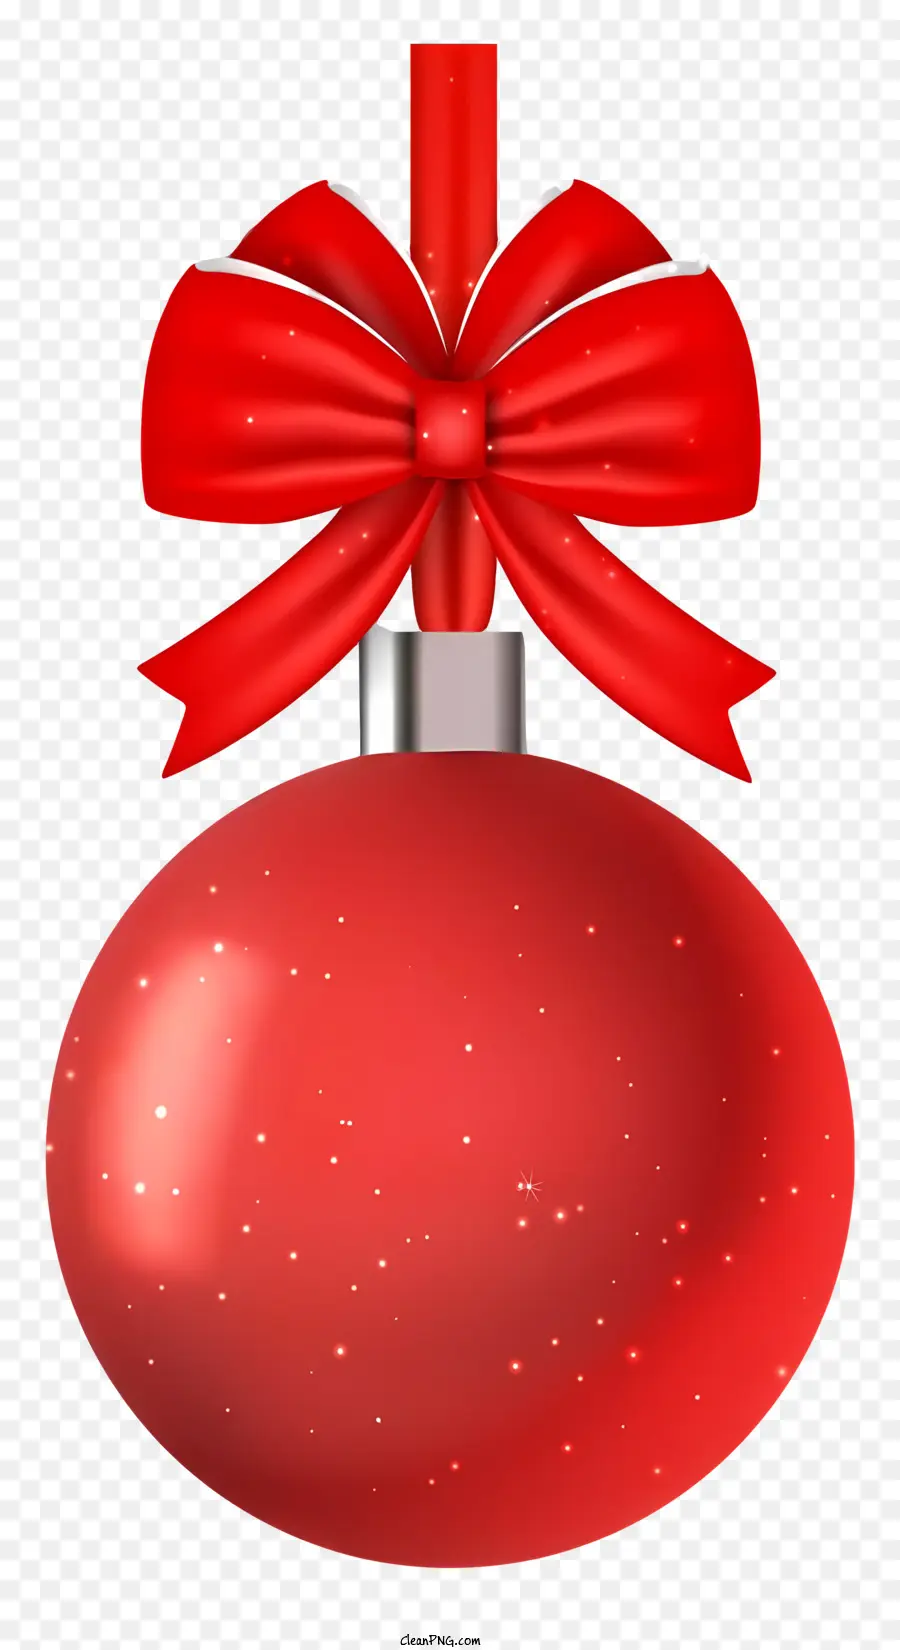 Red Christmas ornament